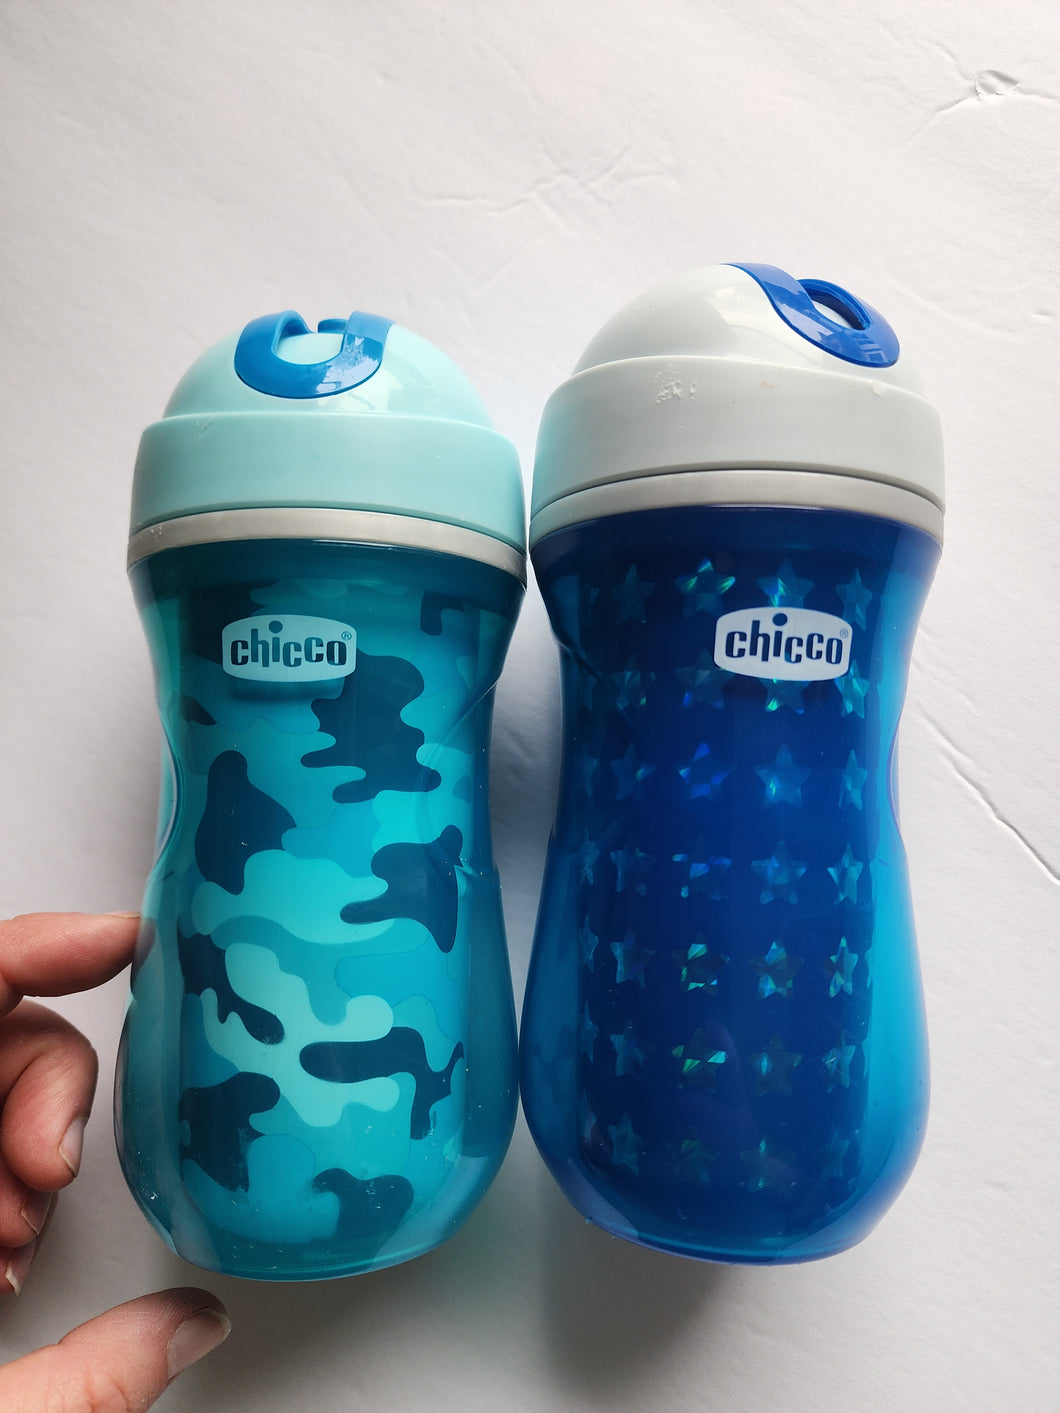 2 Chicco Insulated straw sippy cups